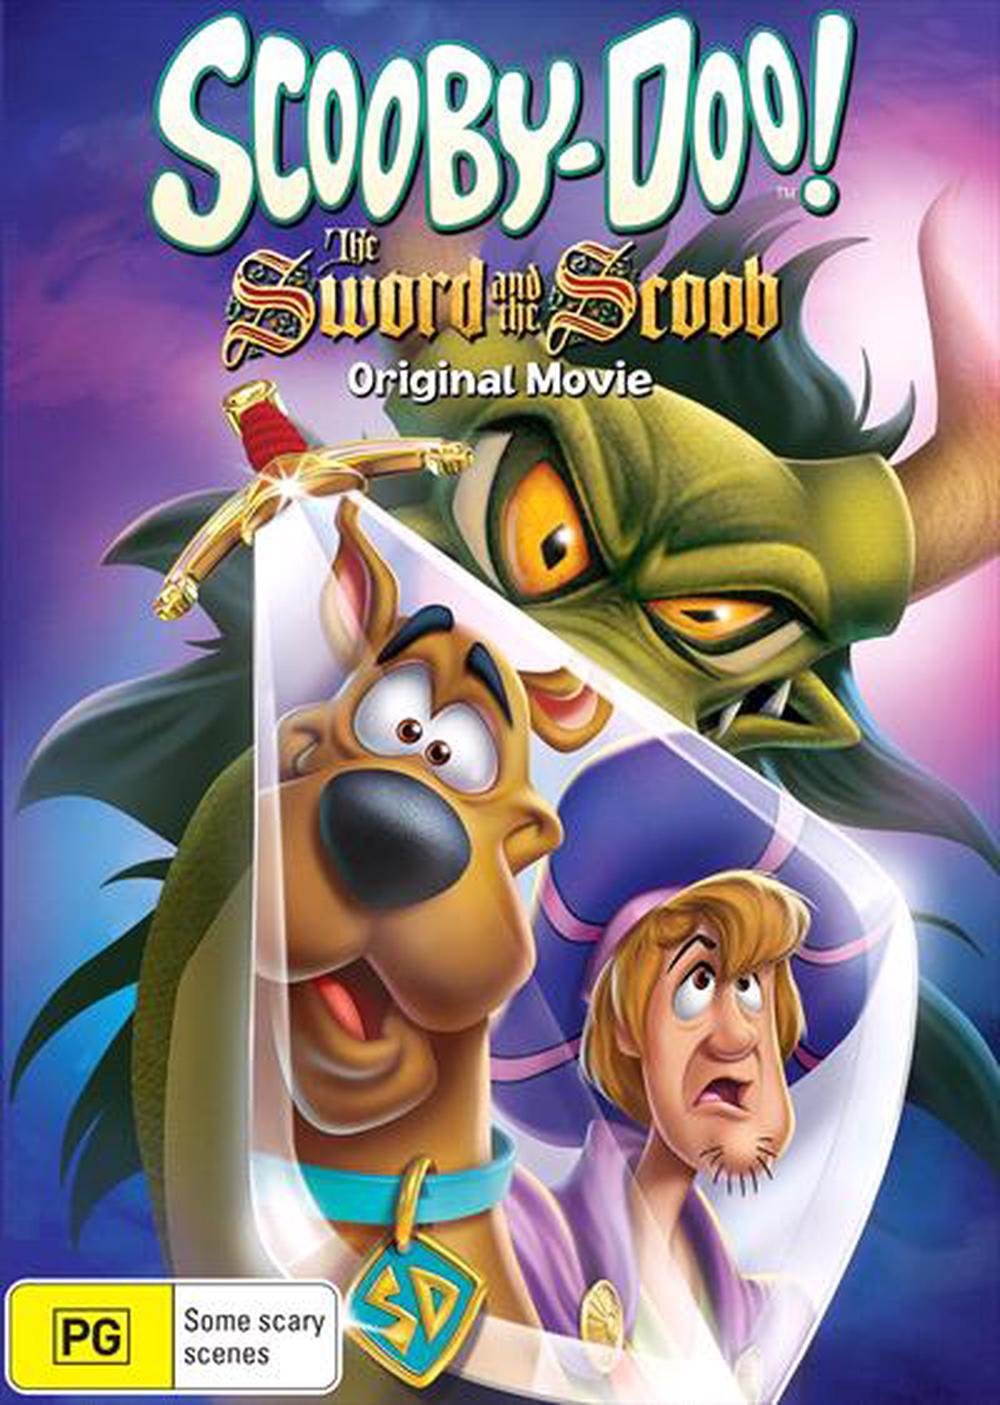 Scooby-Doo! The Sword And The Scoob, DVD | Buy online at The Nile